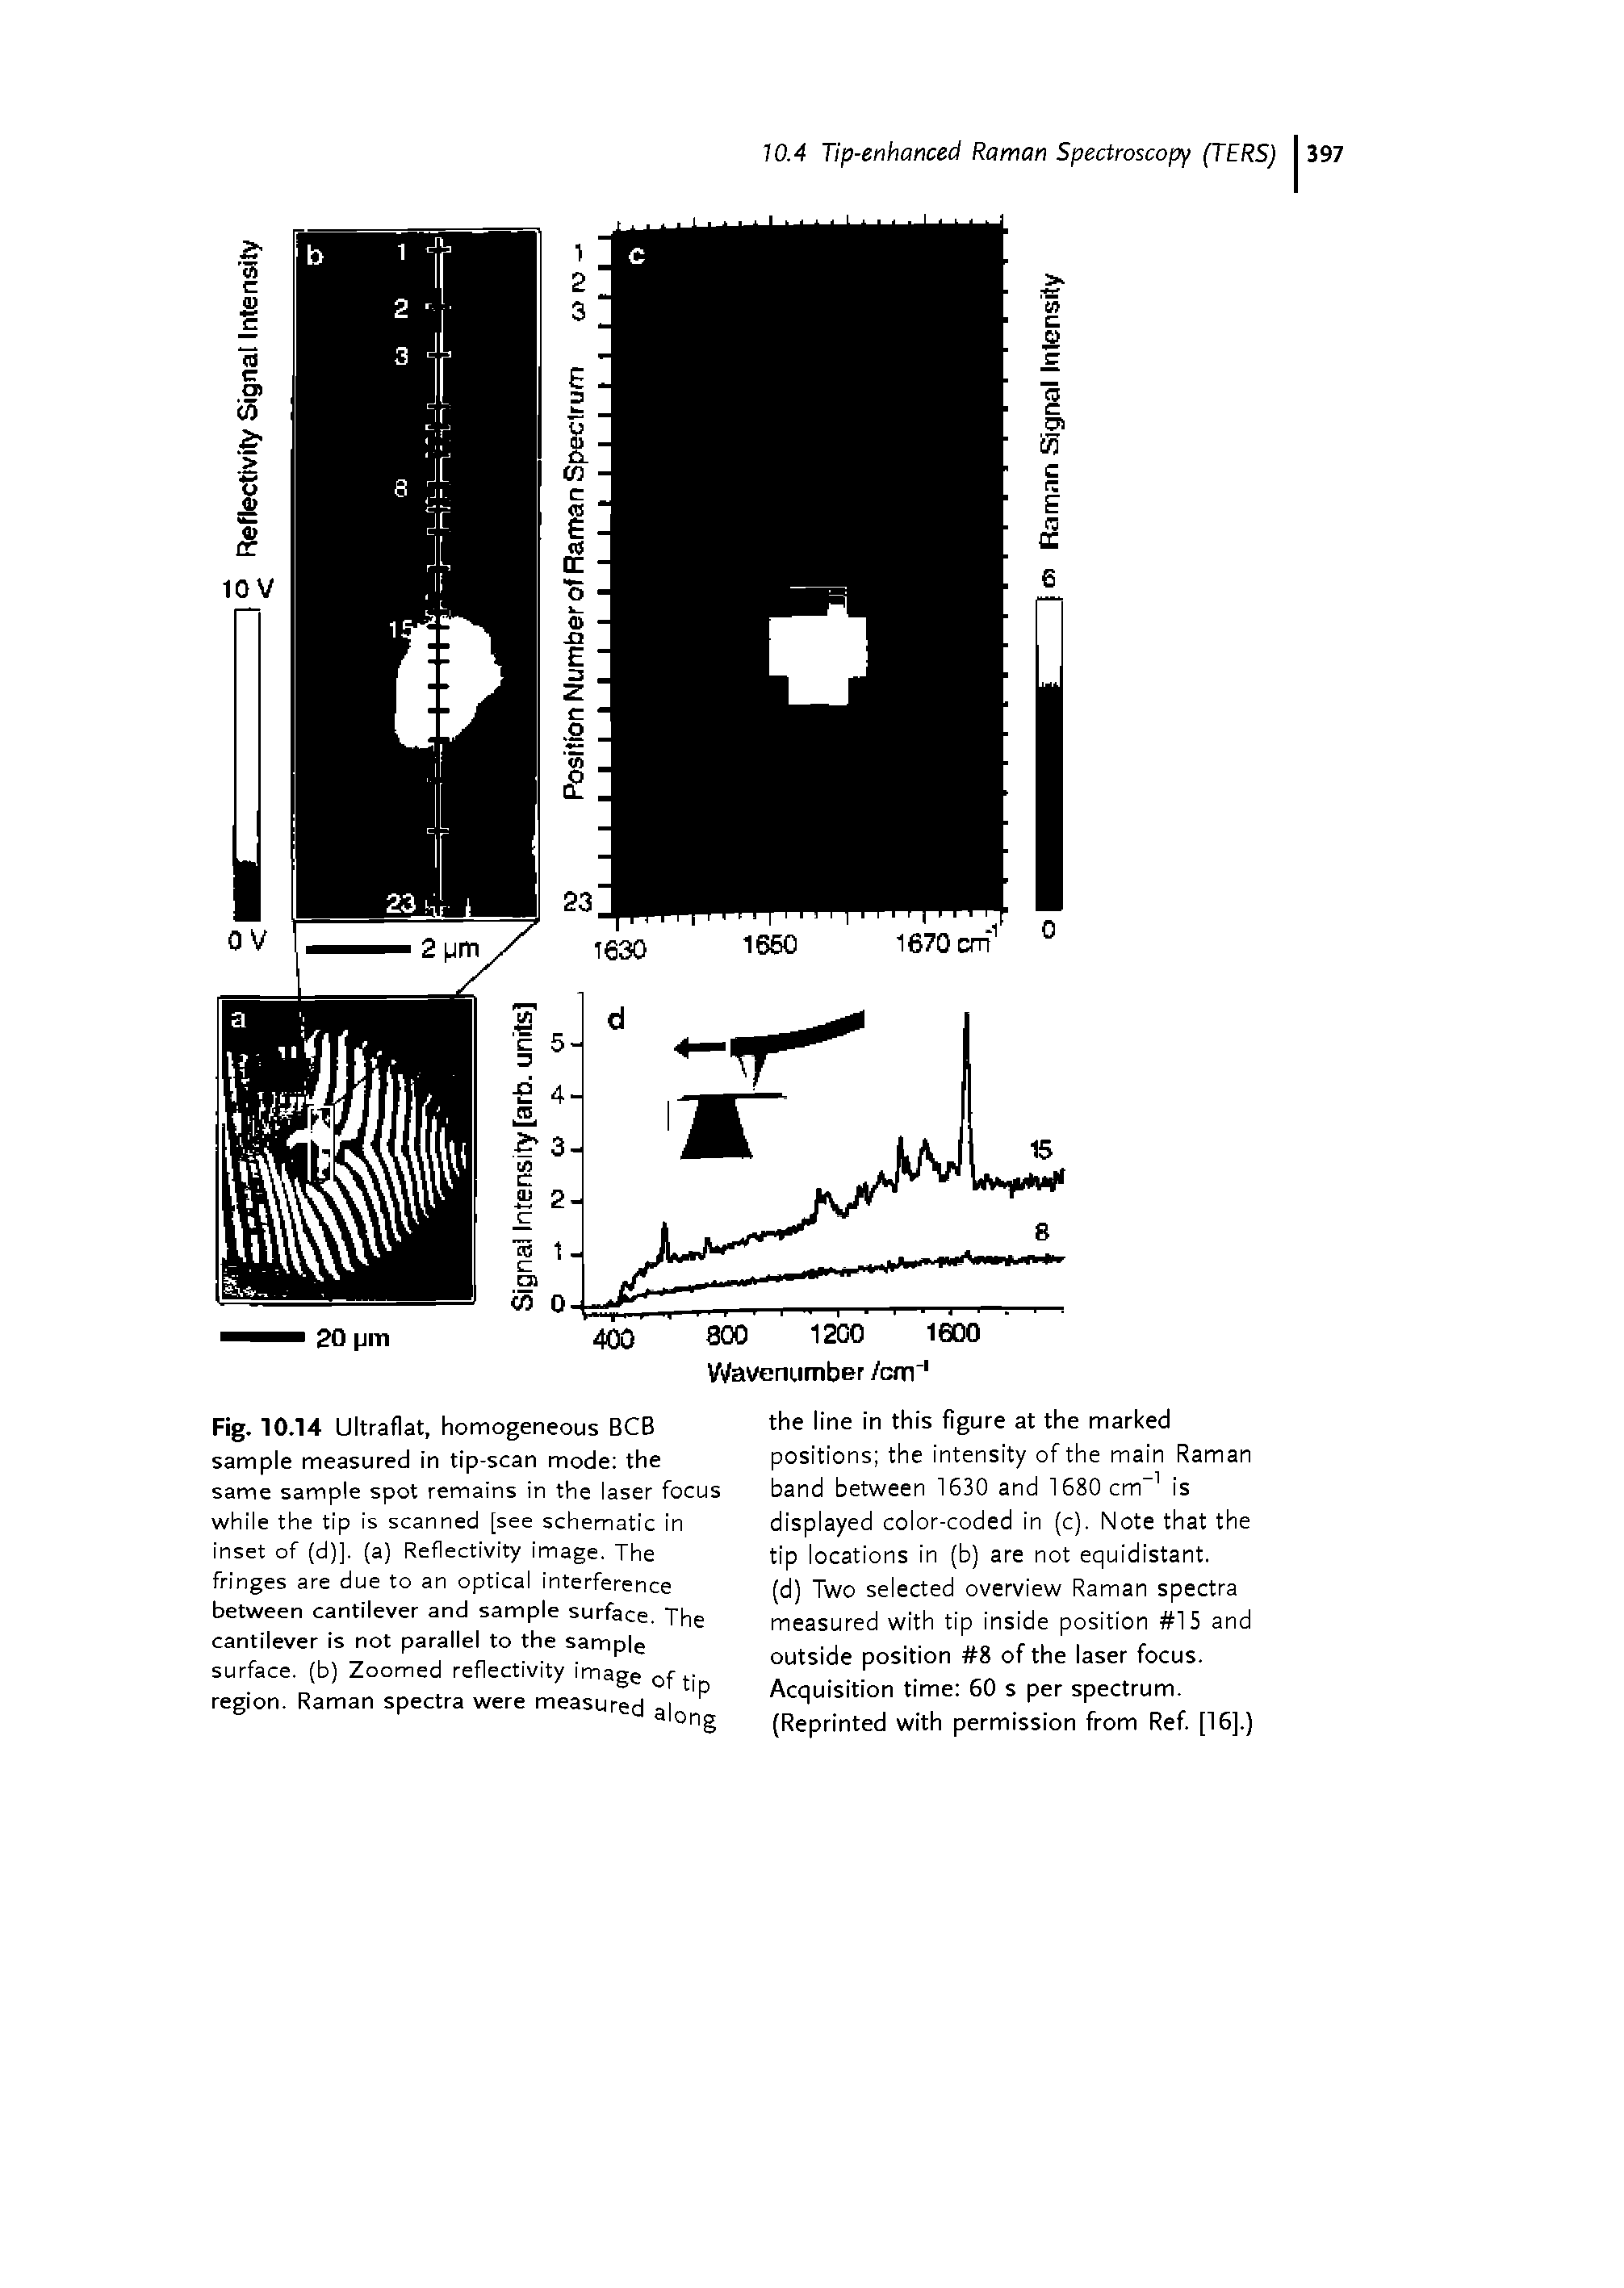 Fig. 10.14 Ultraflat, homogeneous BCB sample measured in tip-scan mode the same sample spot remains in the laser focus while the tip is scanned [see schematic in inset of (d)]. (a) Reflectivity image, The fringes are due to an optical interference between cantilever and sample surface. The cantilever is not parallel to the sample surface, (b) Zoomed reflectivity image of tip region. Raman spectra were measured along...